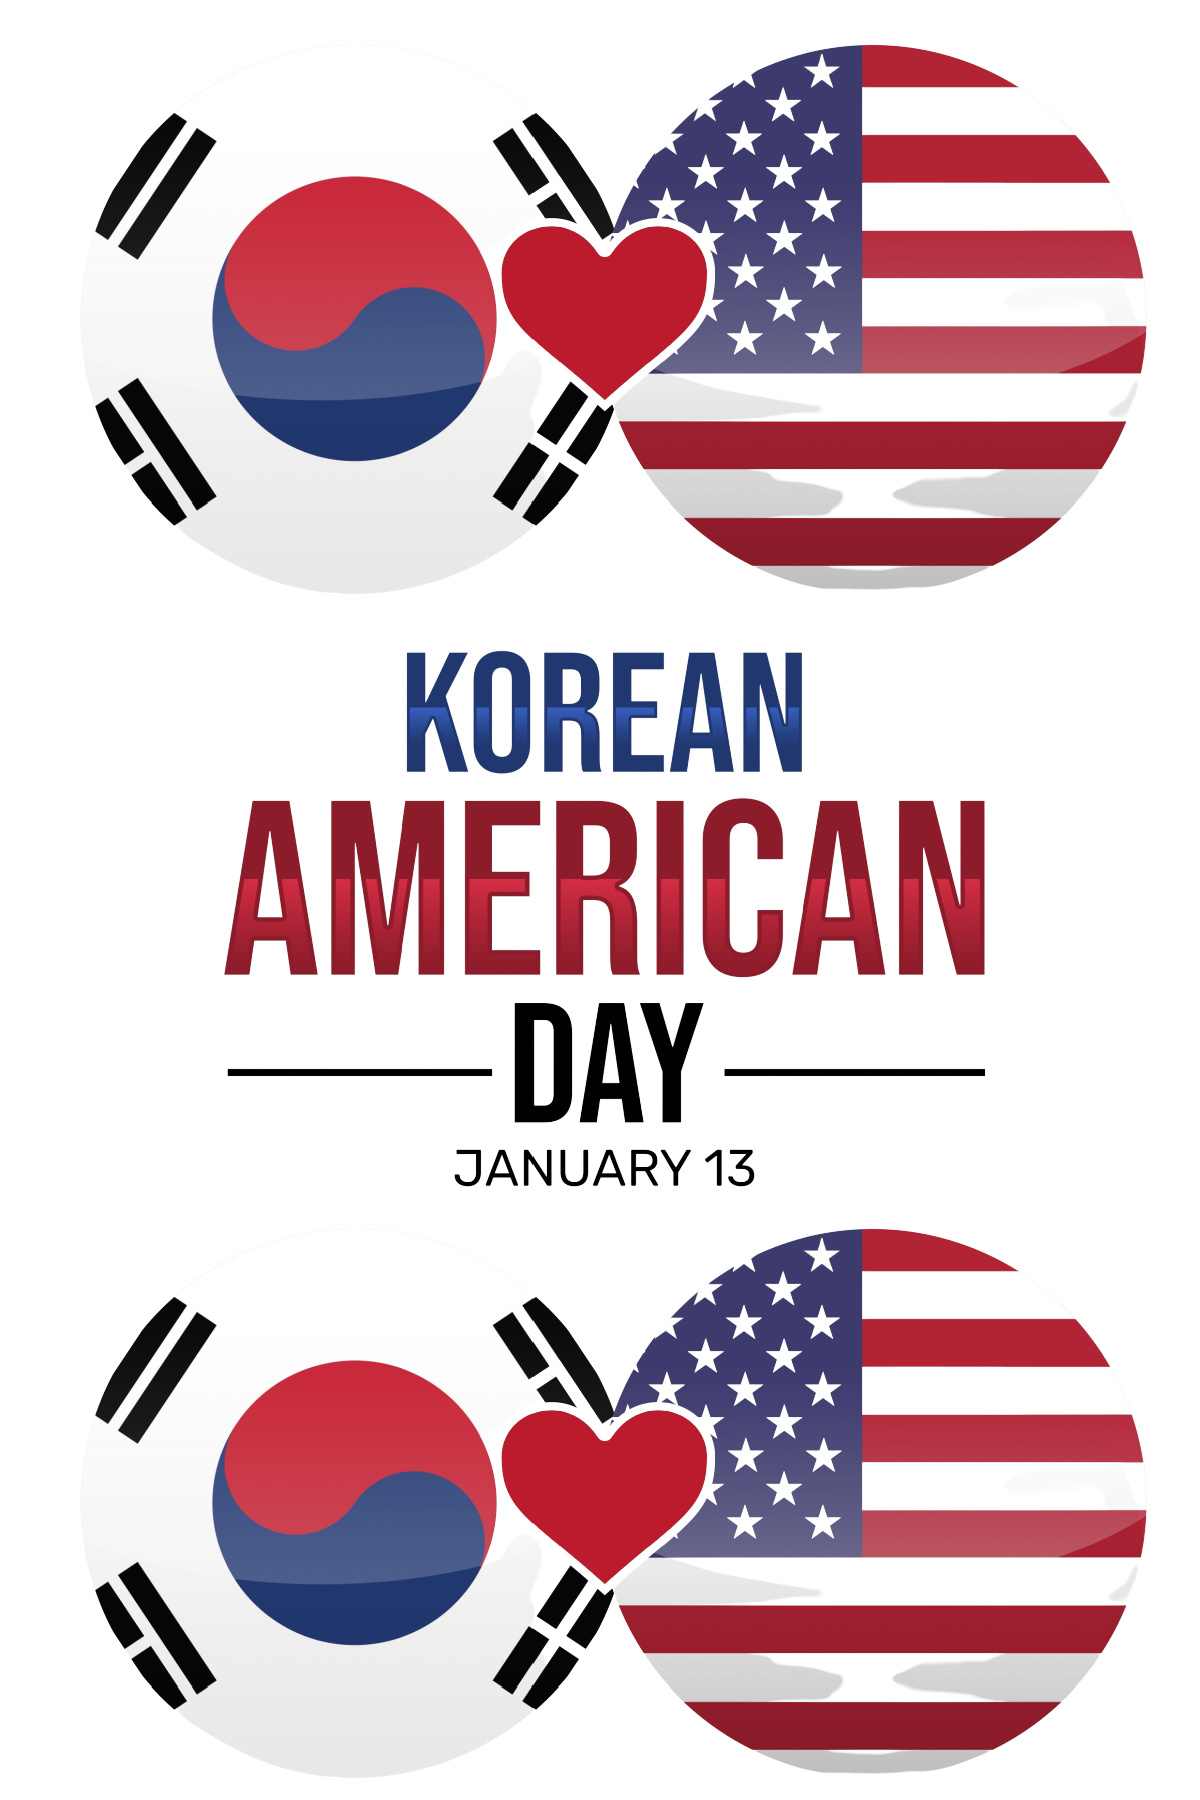 A South Korean flag and United States flag joined by a heart at the top of the image and bottom of the image, with the words "Korean American Day January 13" in the middle.